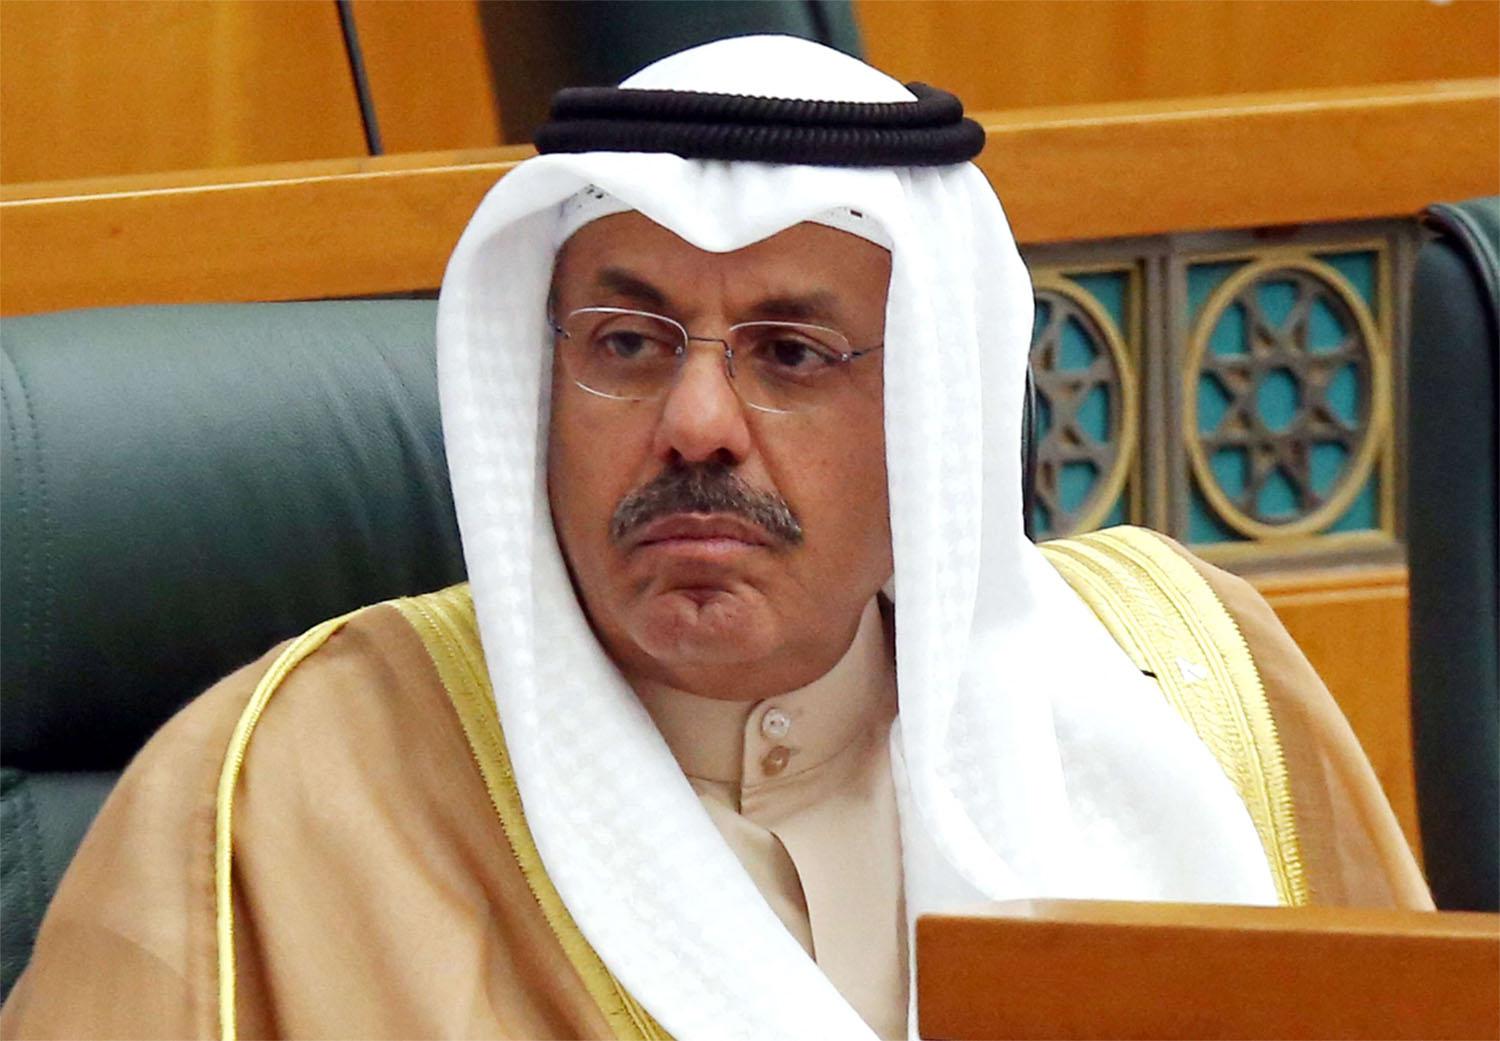 Sheikh Ahmad was first named prime minister in July 